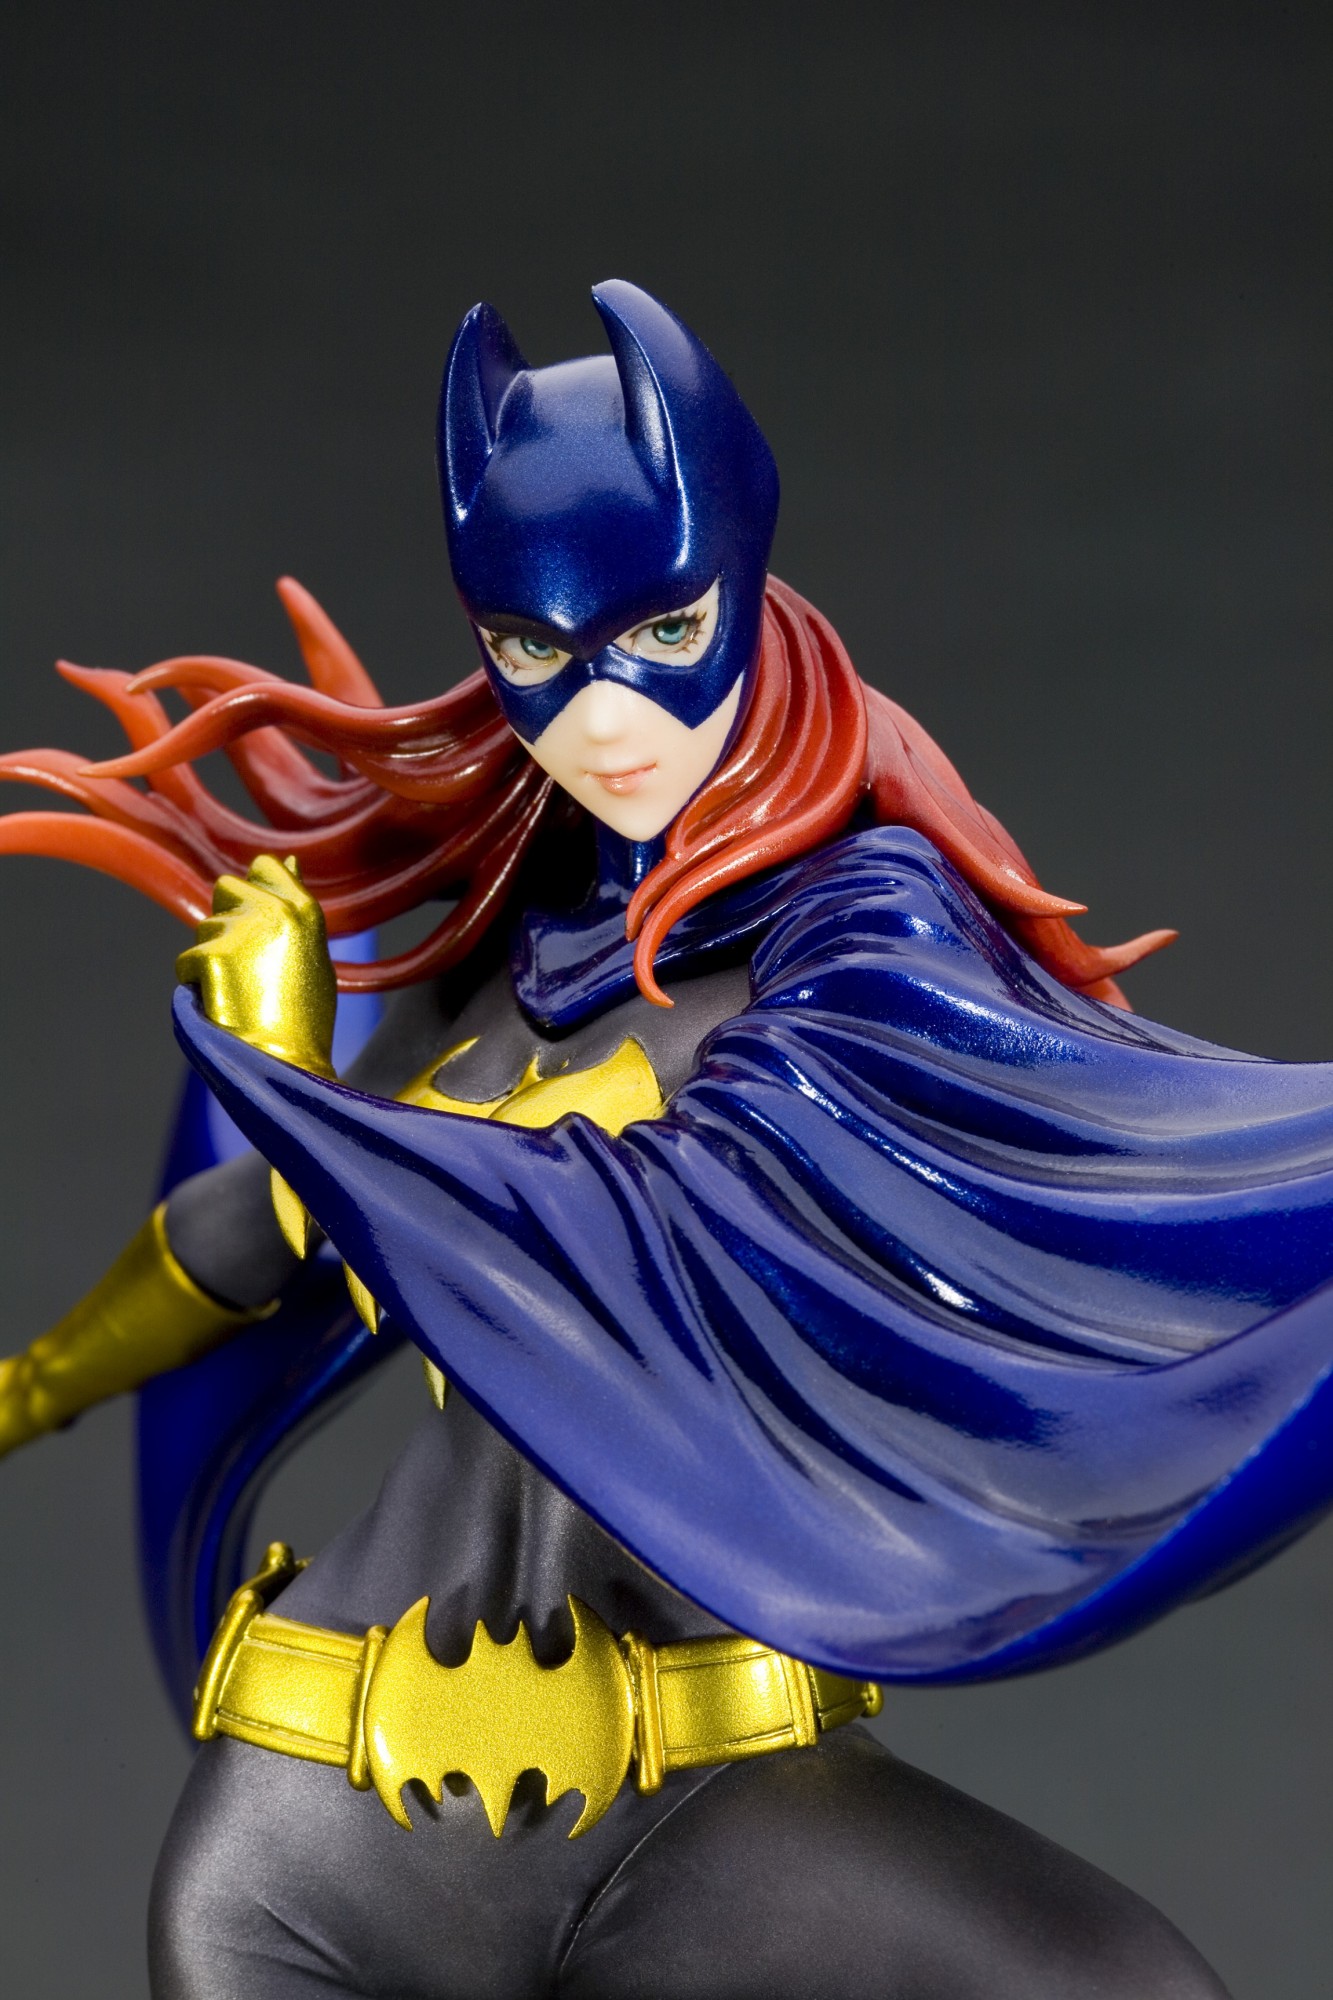 Batgirl Is Here to Save the Day and Look Stunning, Too